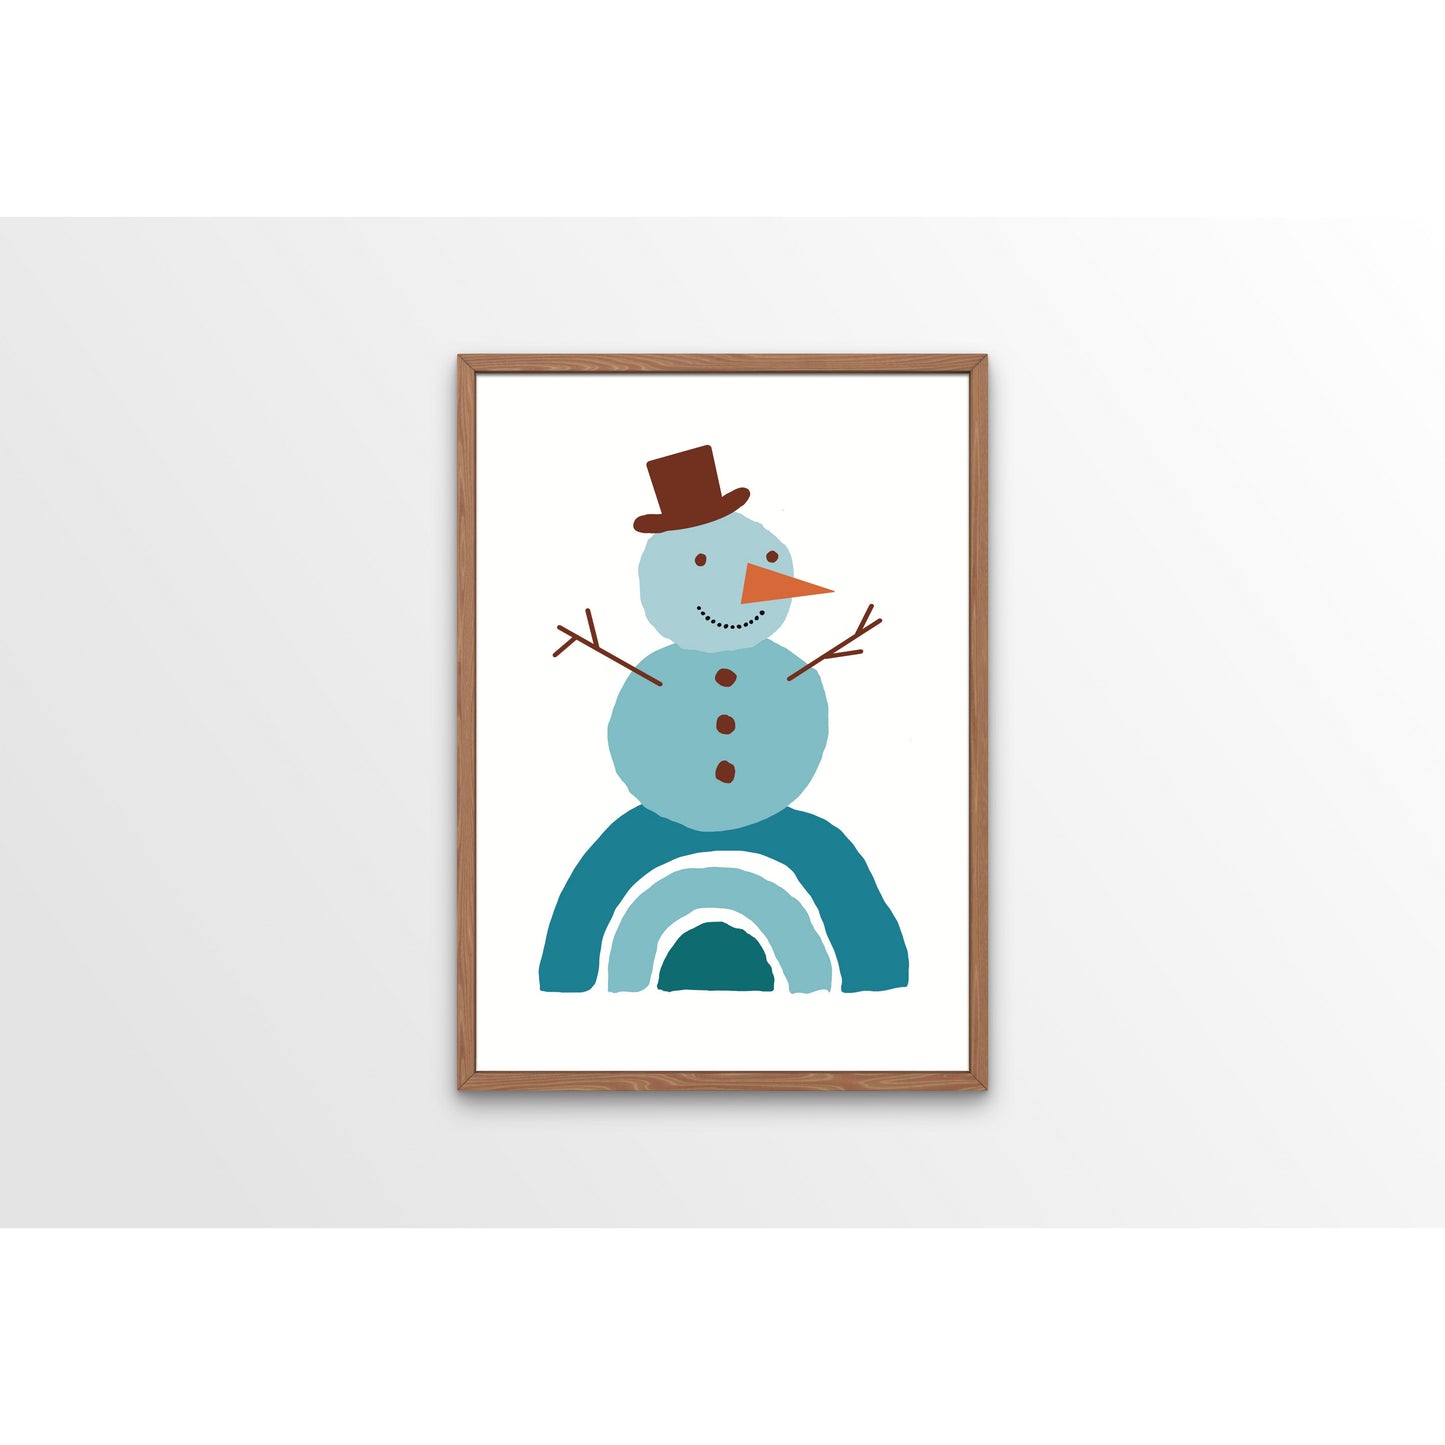 This blue Boho Snowman is so cool and festive! He's perfect for livening up your Christmas decor, and he's also great for adding a bit of fun and quirkiness to your holiday season. He makes a great gift, too!